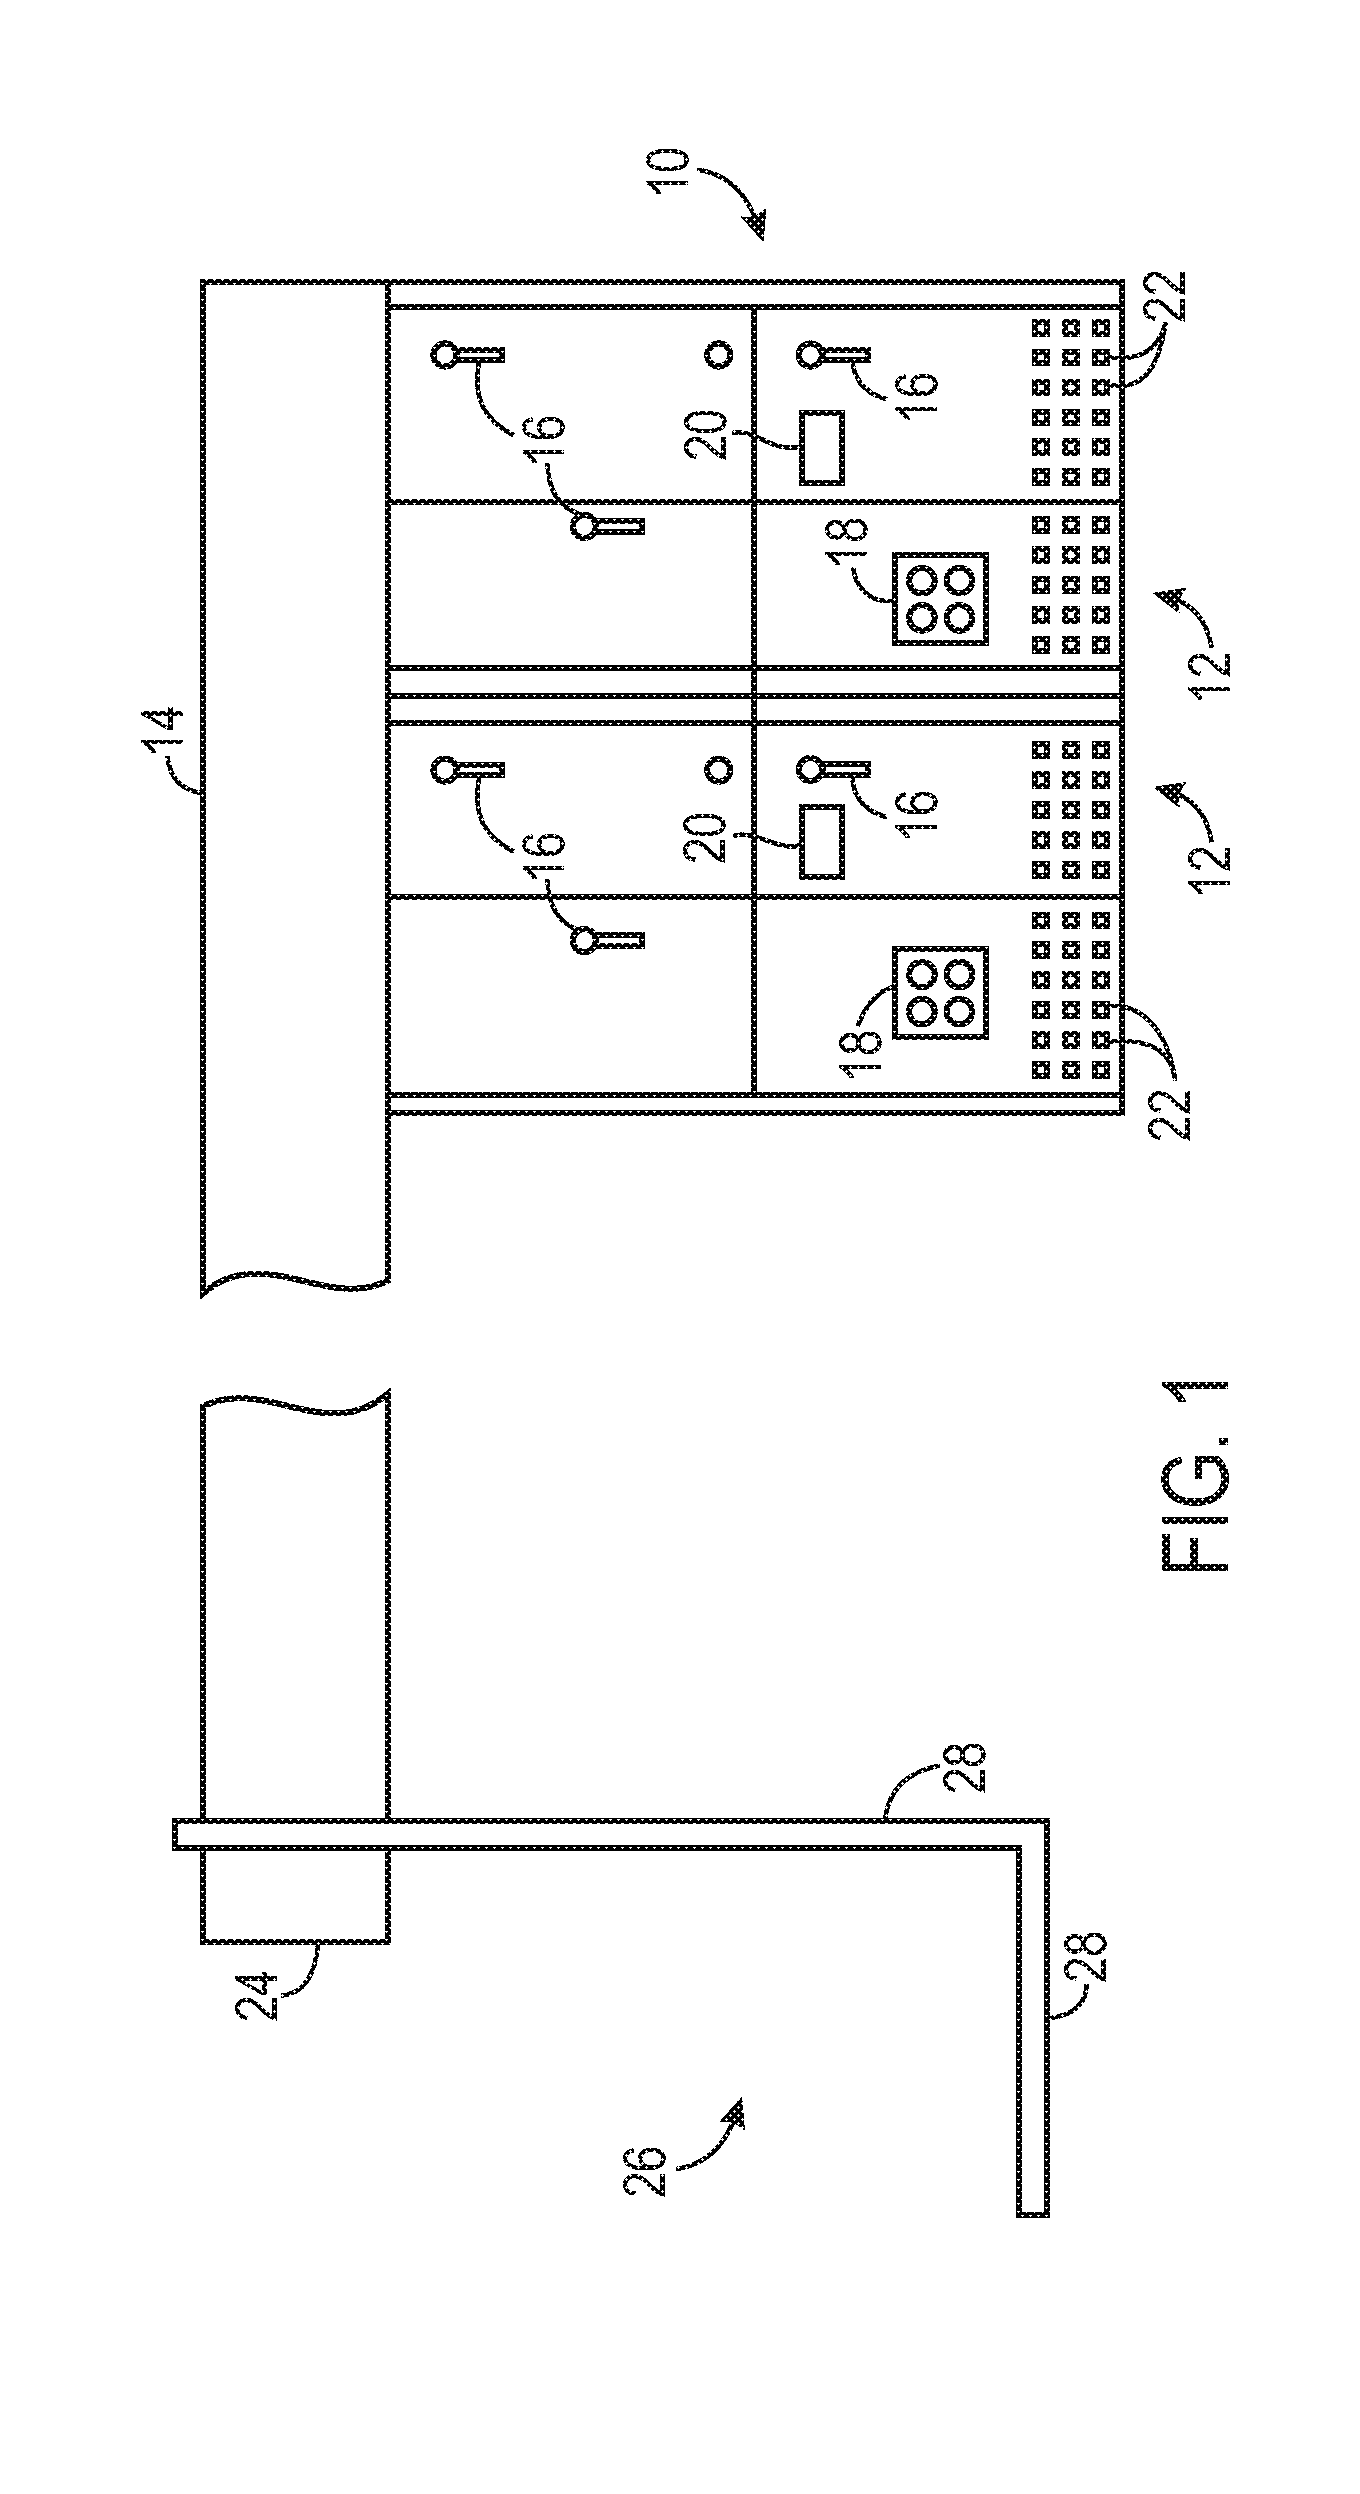 System and method for ventilating and isolating electrical equipment